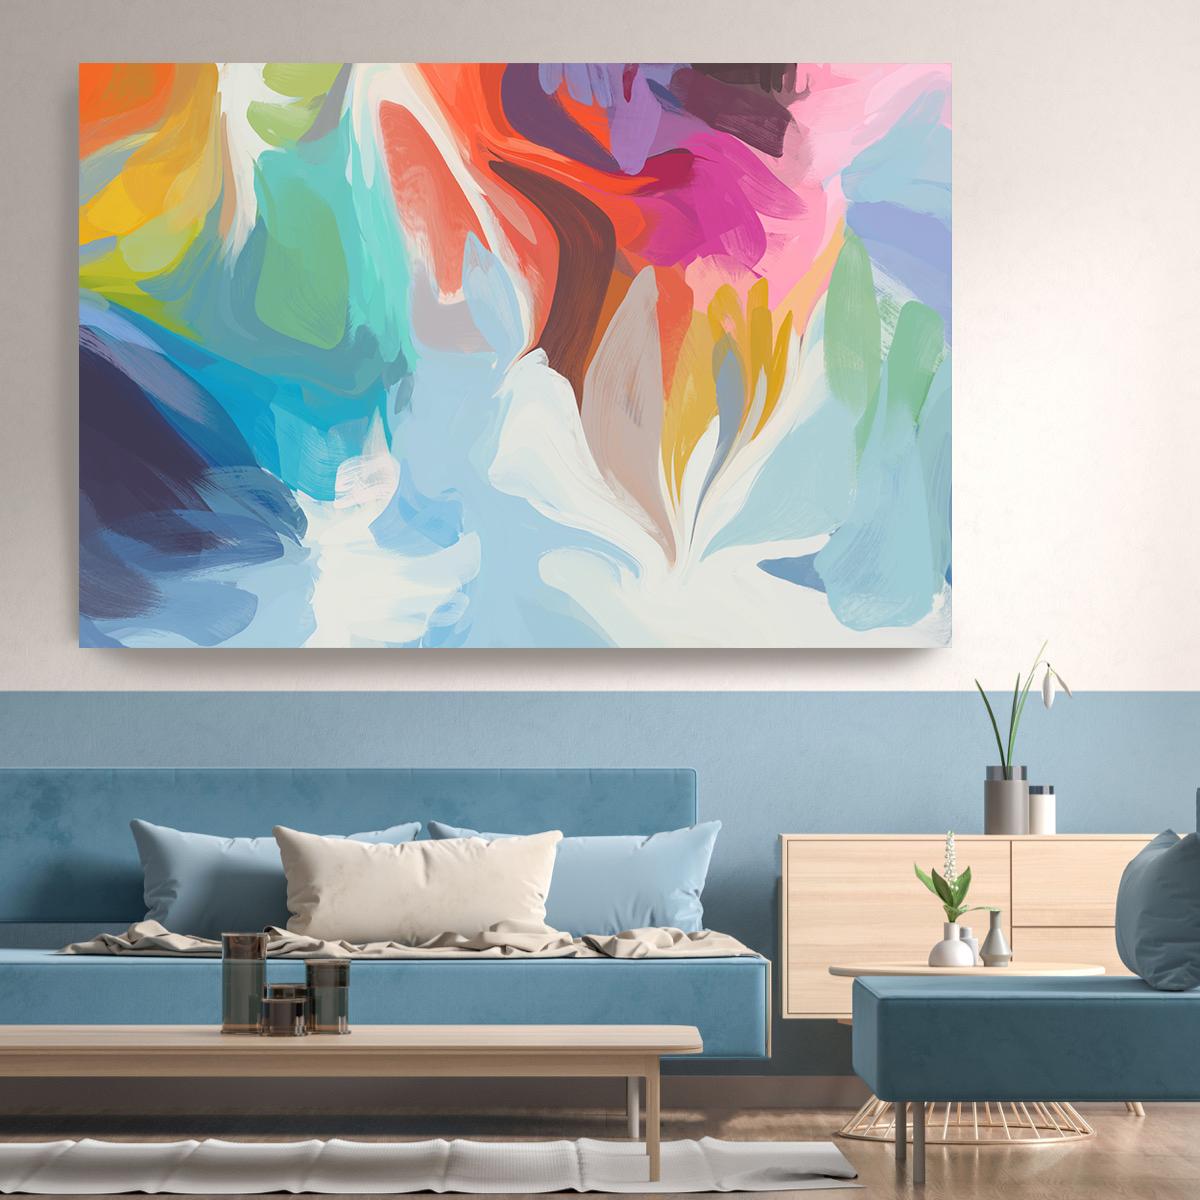 Irena Orlov Abstract Painting - Abstract Flow Colorful Painting Mixed Media 40x60" Another Self